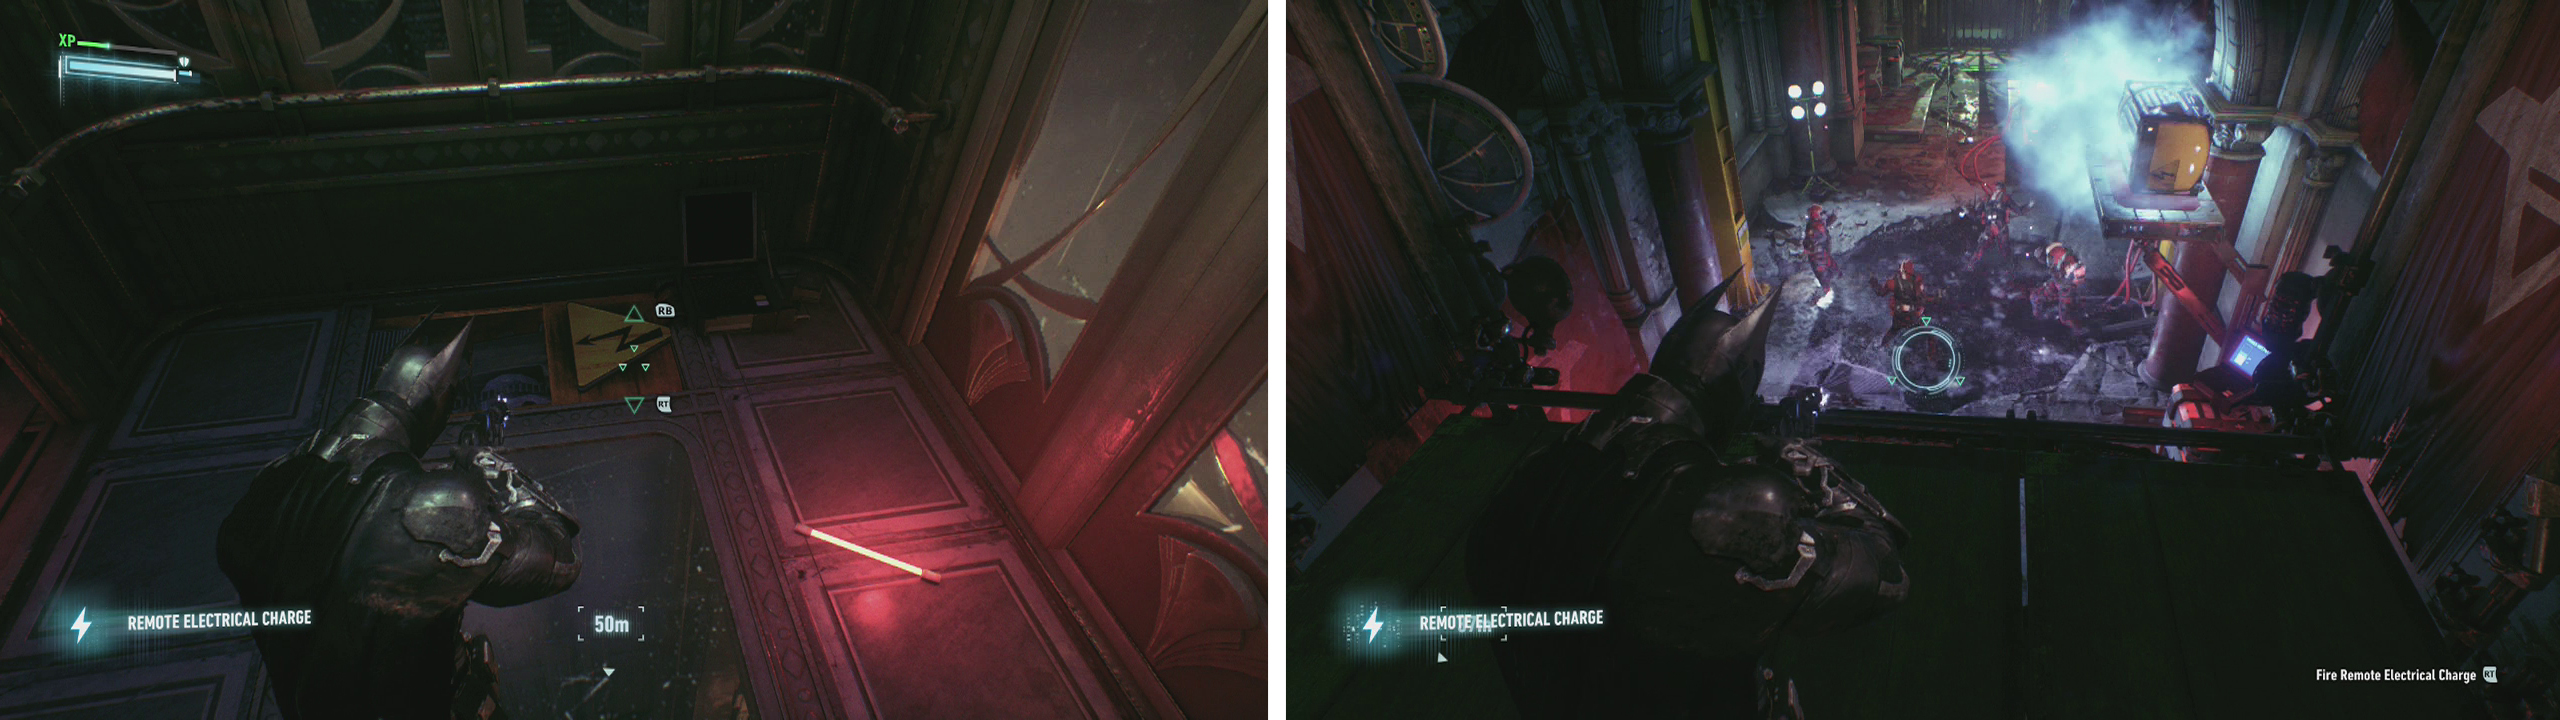 Use the Remote Electrical Charge on the generators (left) to move the lift. You can also use it on the generator (right) to deal with the enemies below.